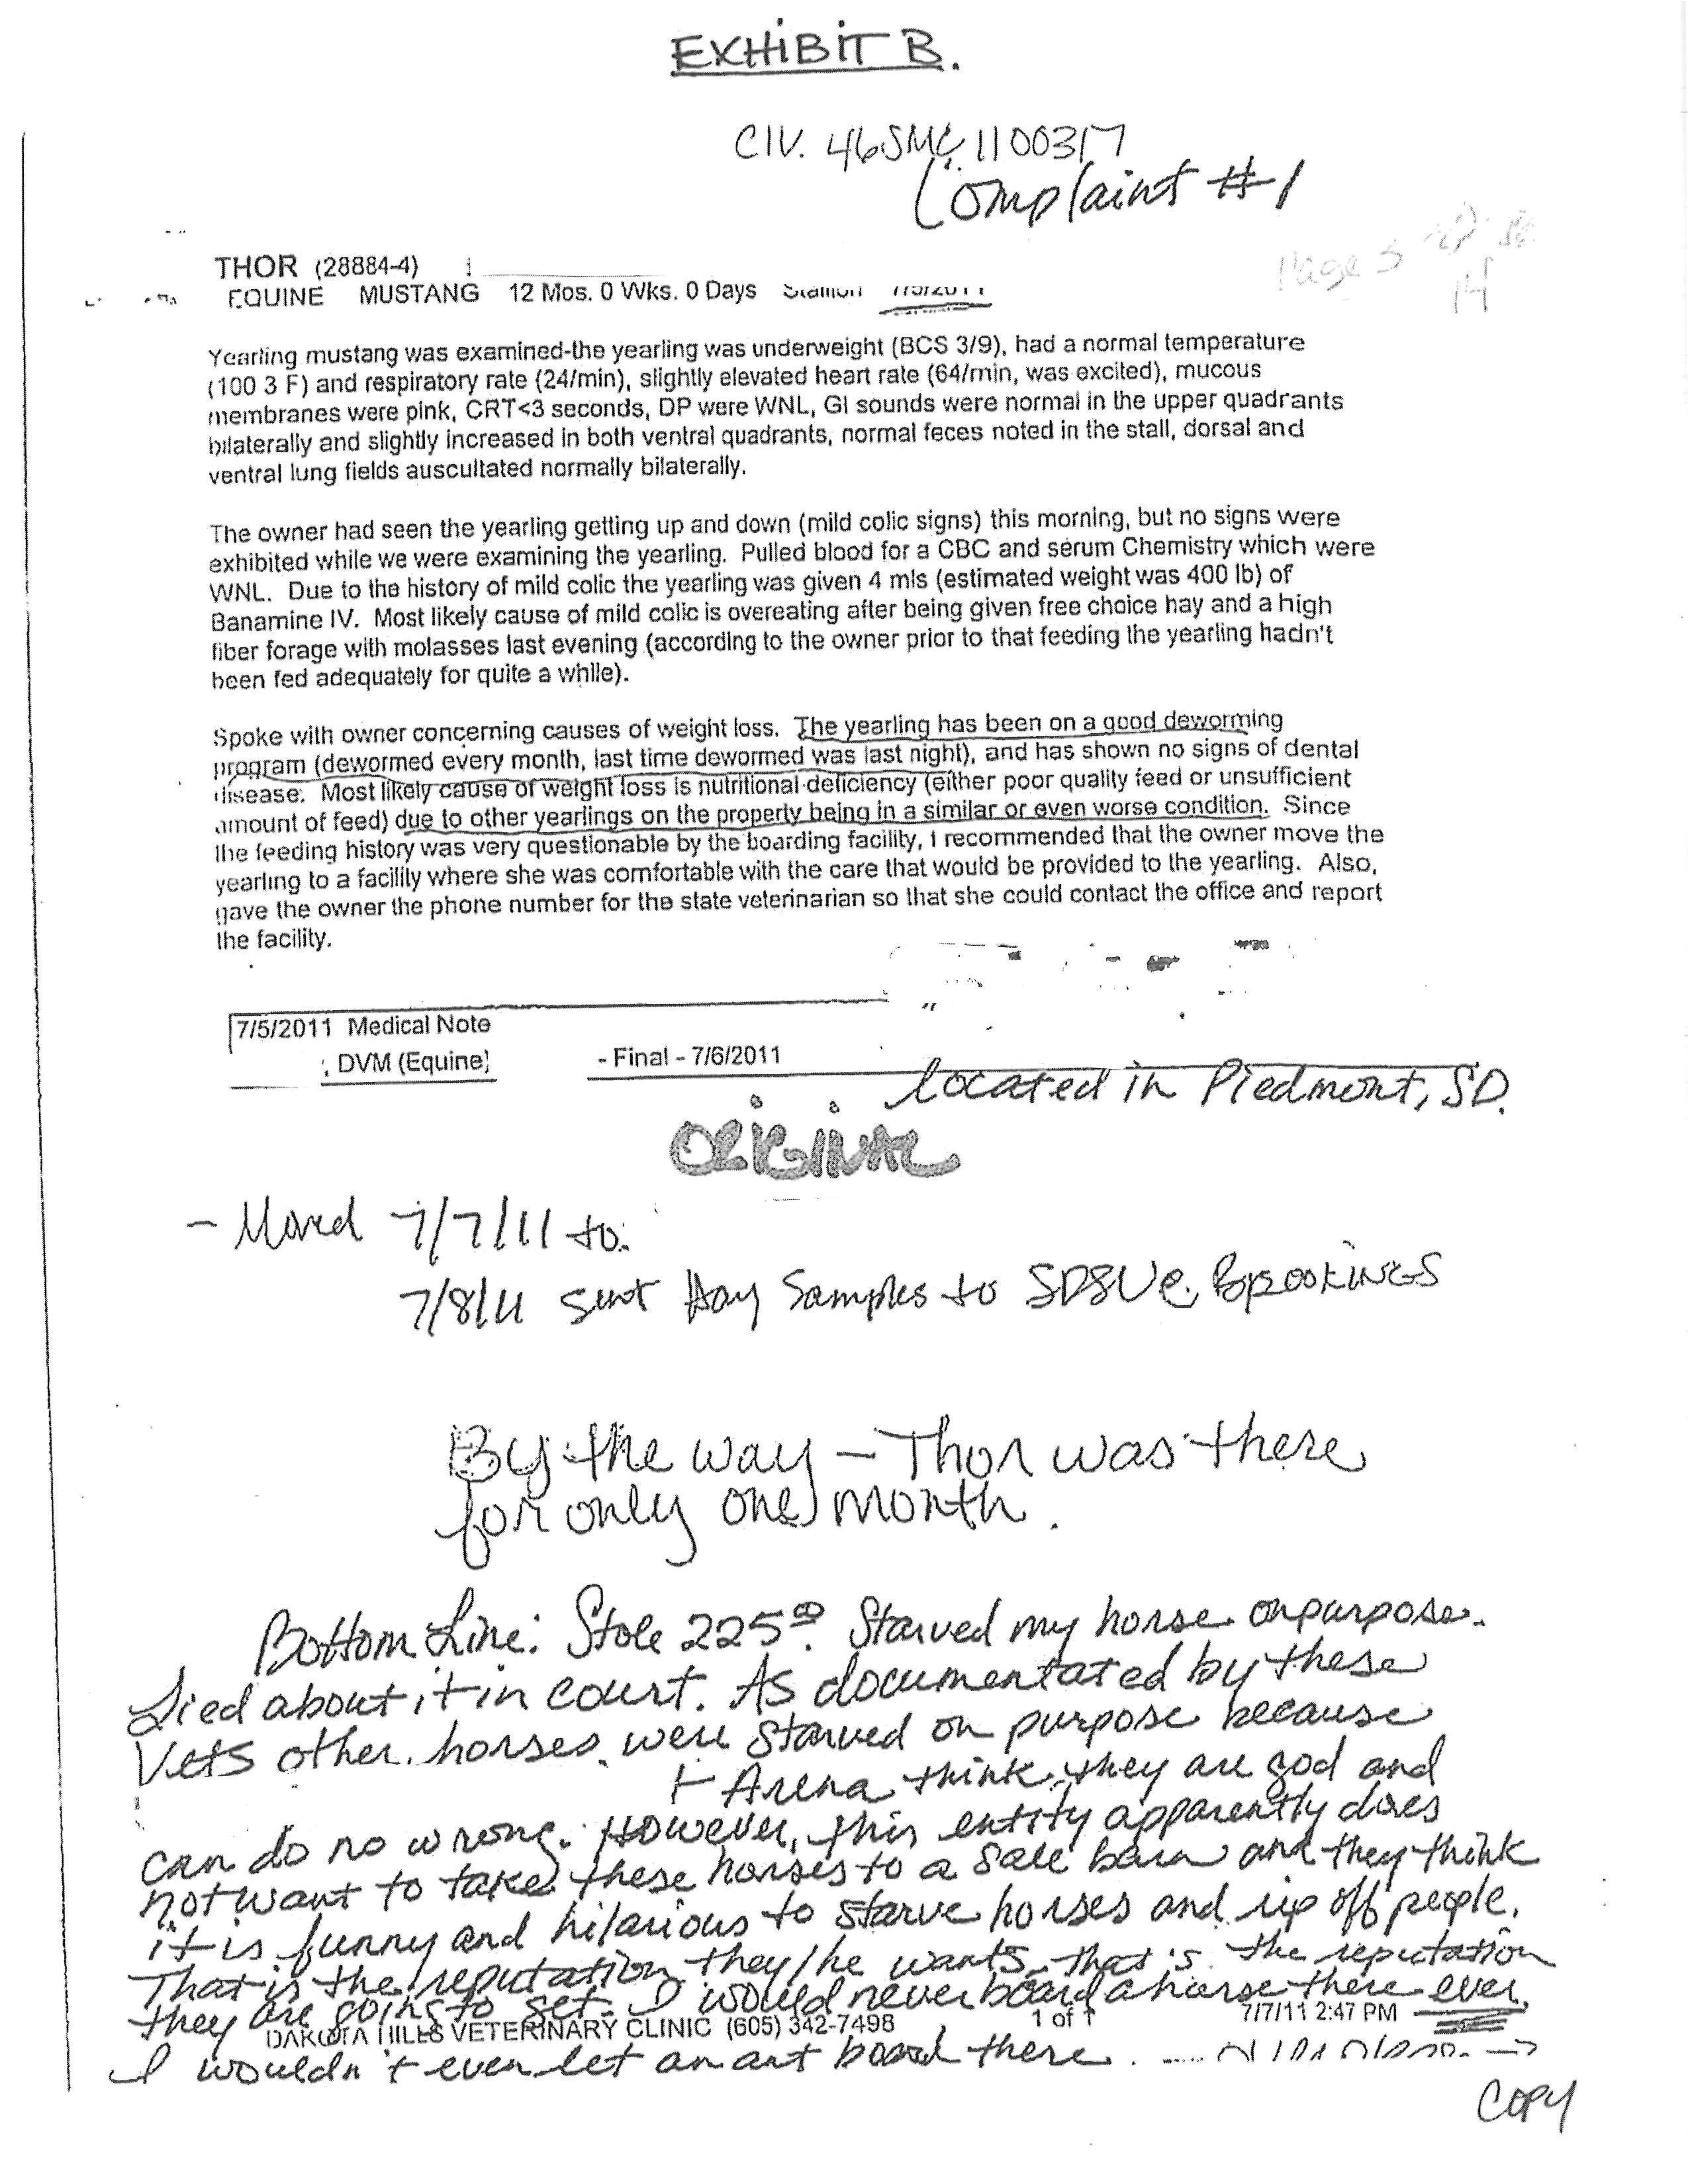 Exhibit B. shows the second page of vet documentation.